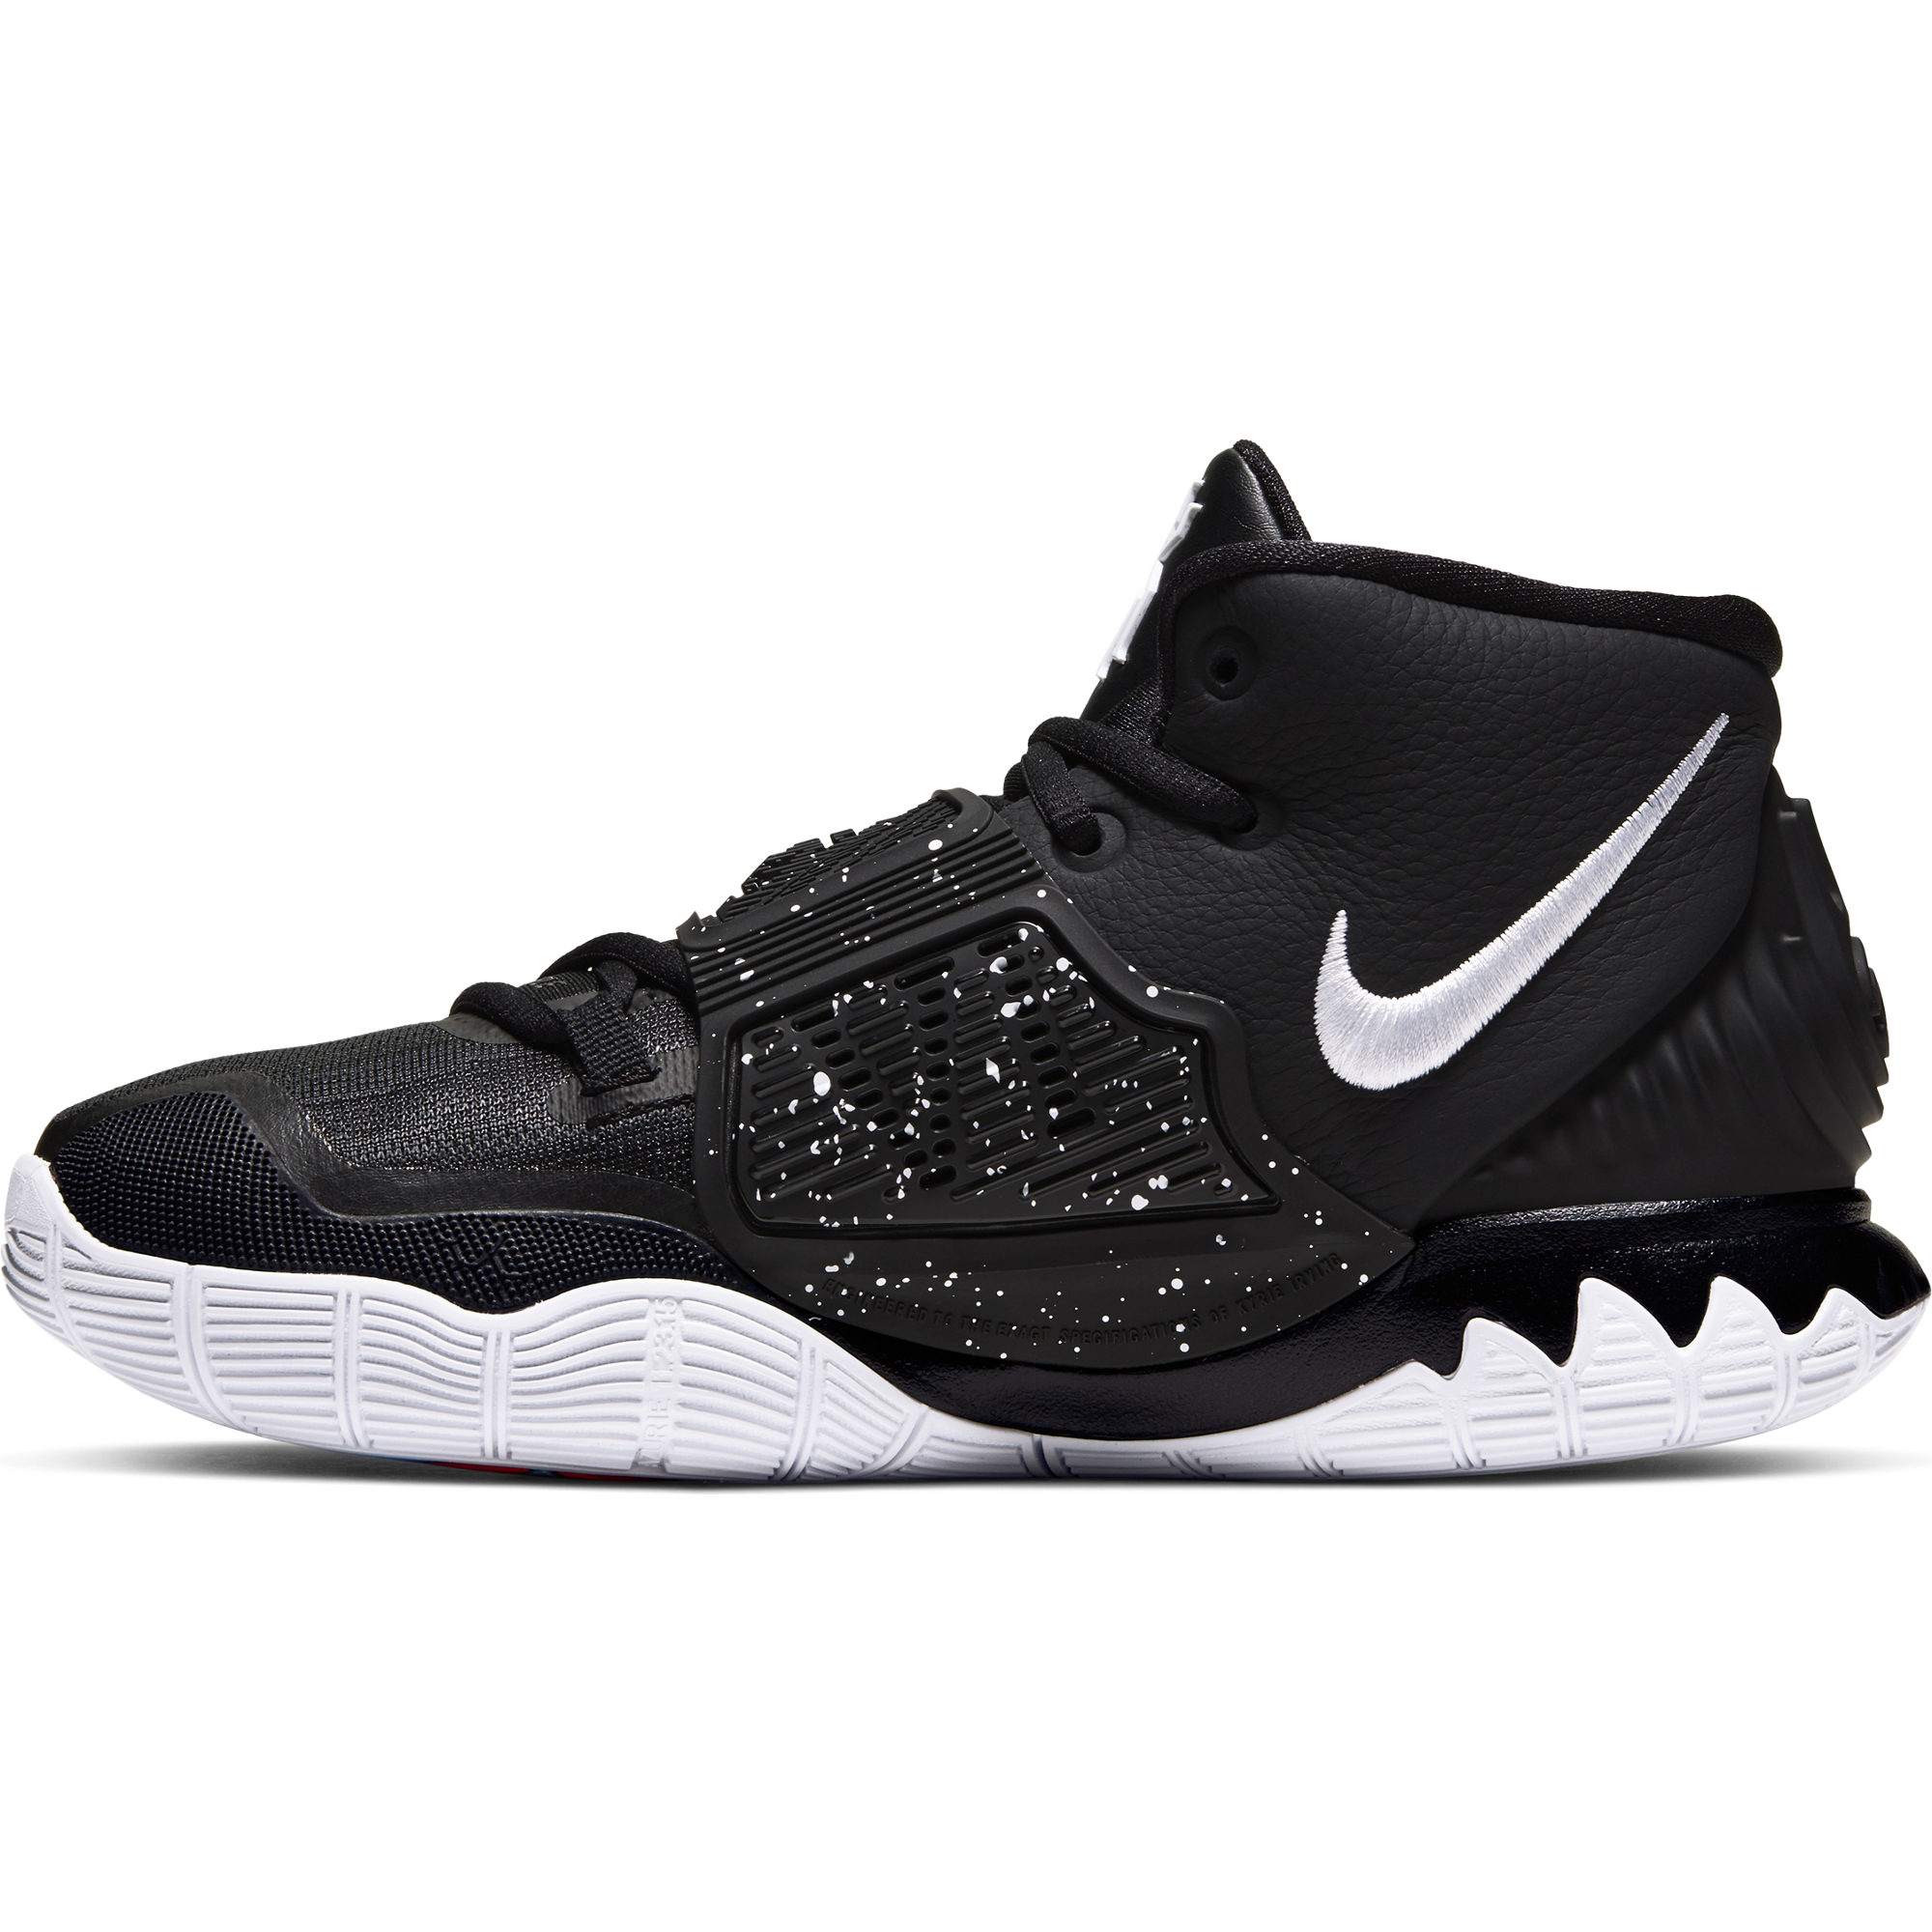 Shiekh Shoes Nike Kyrie 6 'Jet Black' Available Facebook